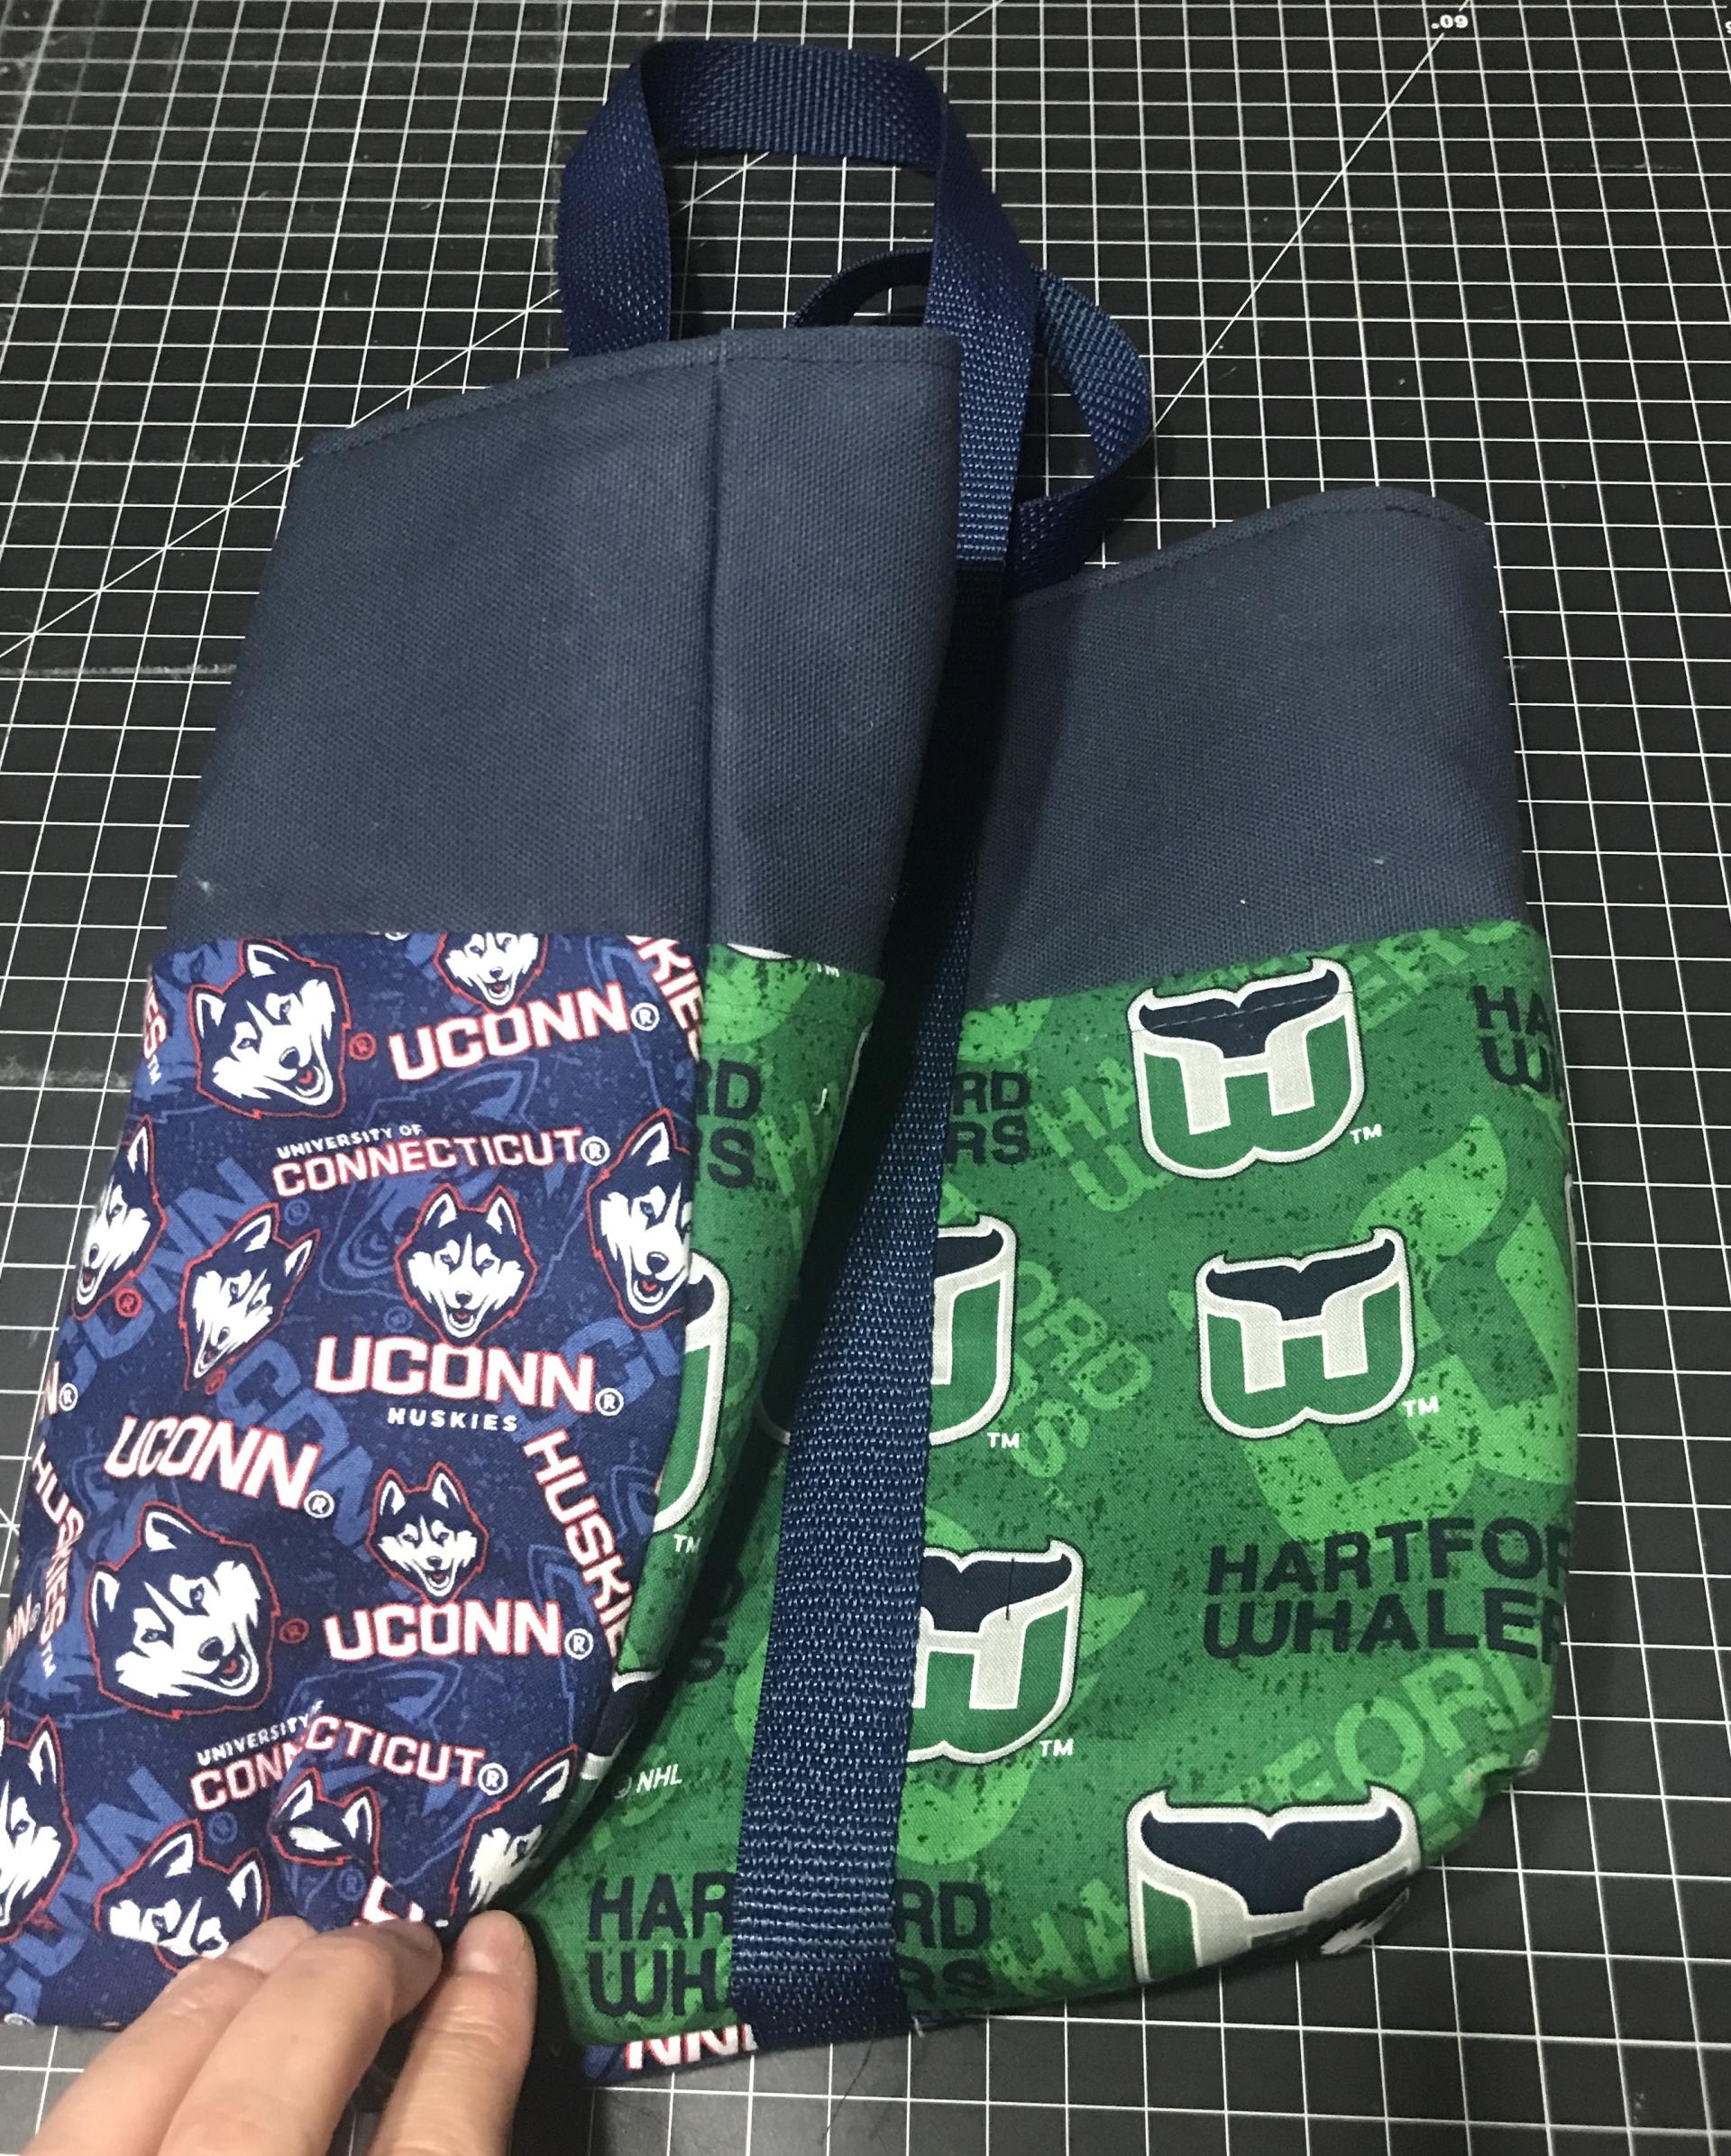 Whalers and UConn on the same bag!